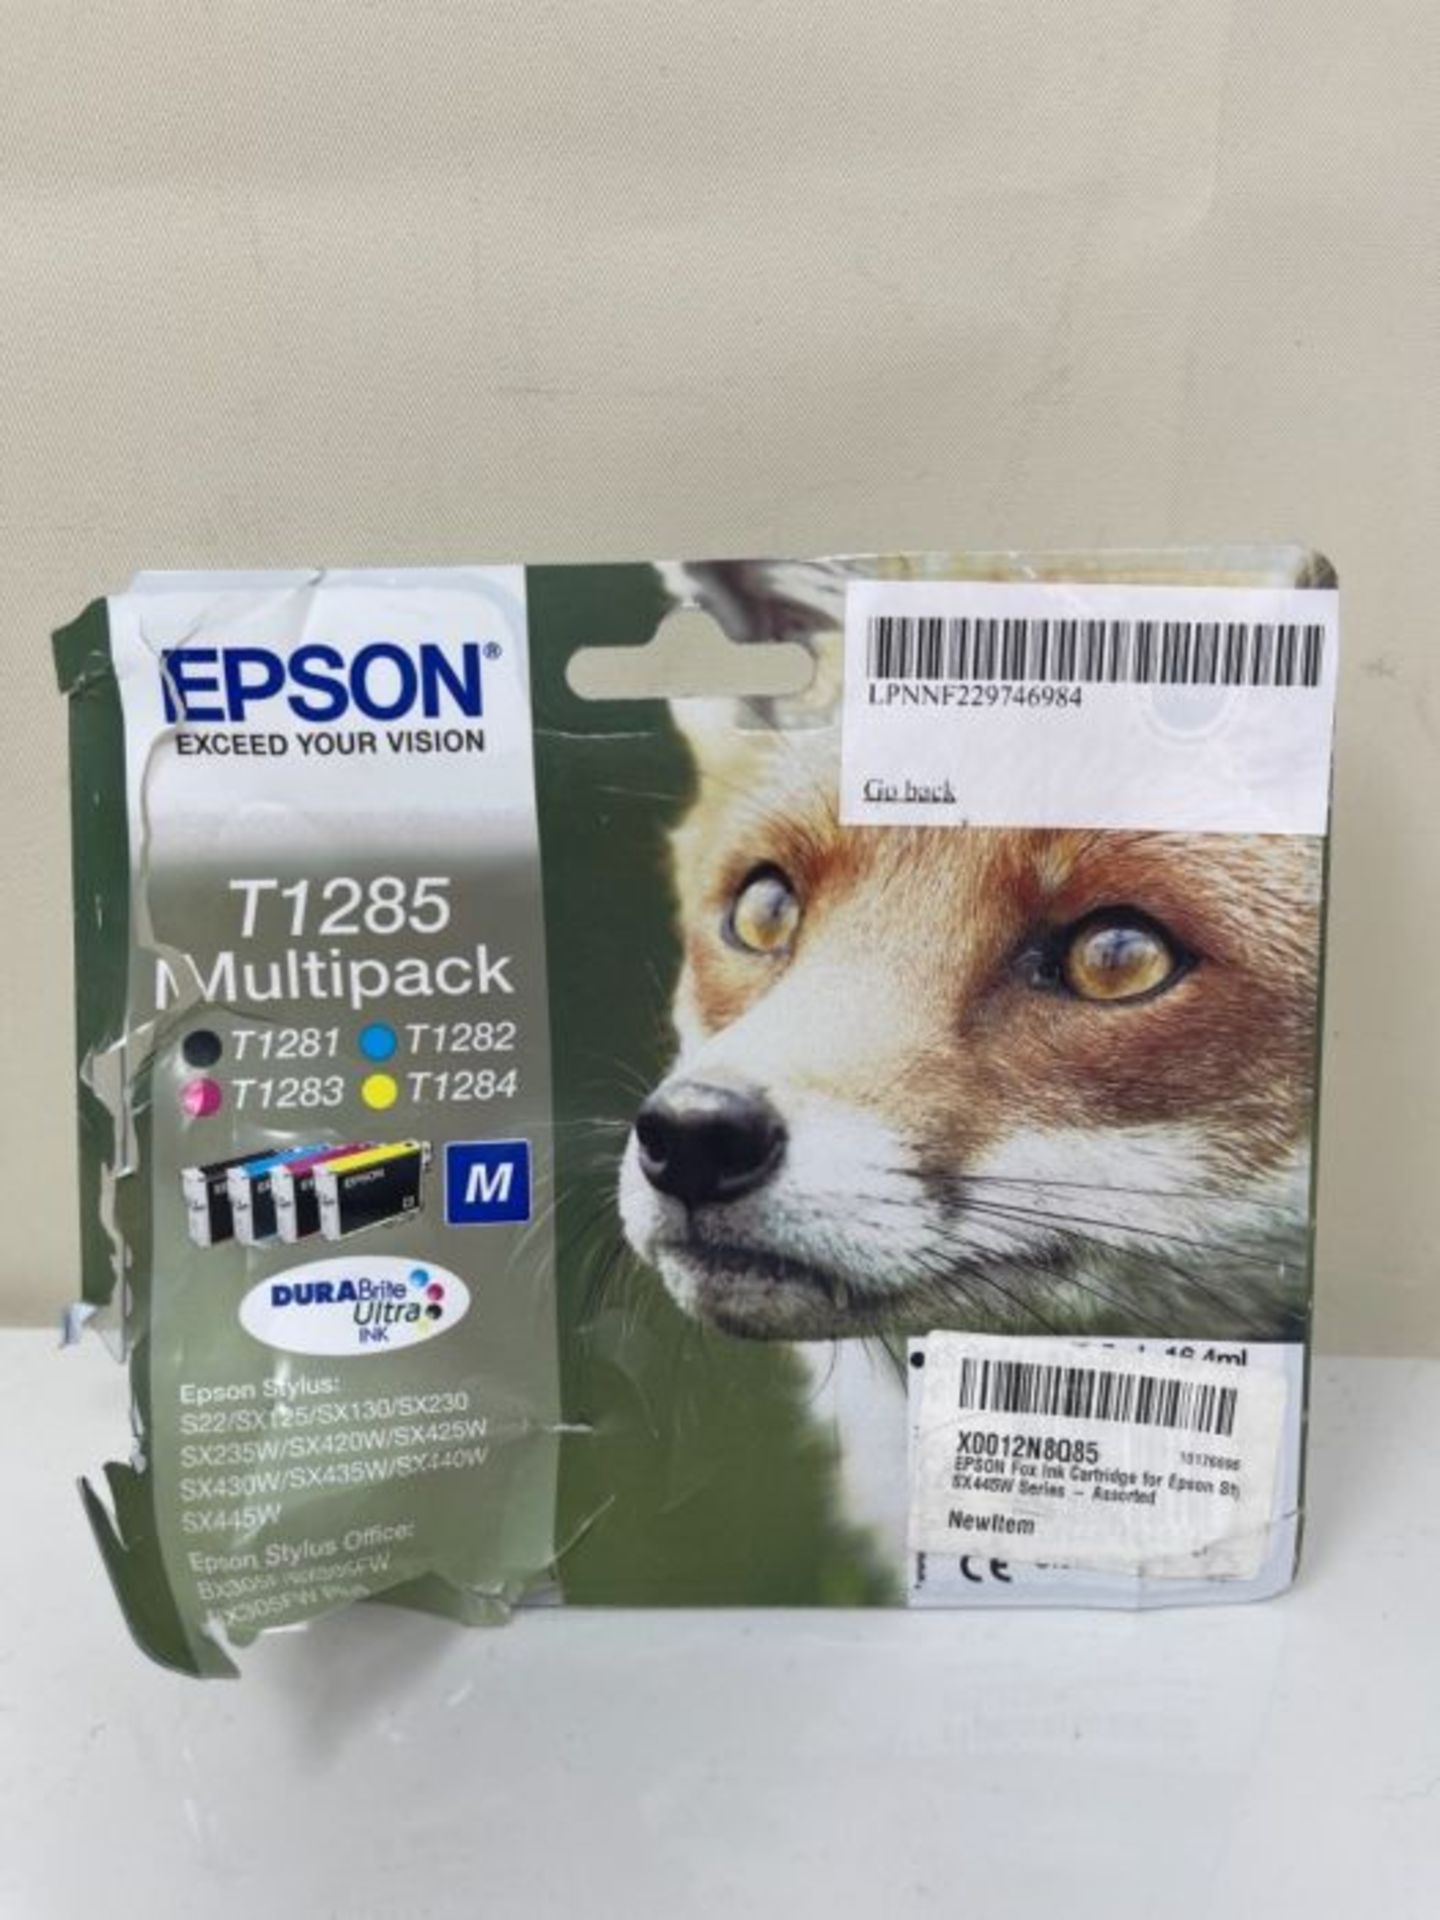 Epson T1285 Fox Genuine Multipack, 4-colours Ink Cartridges, DURABrite Ultra Ink - Image 2 of 3